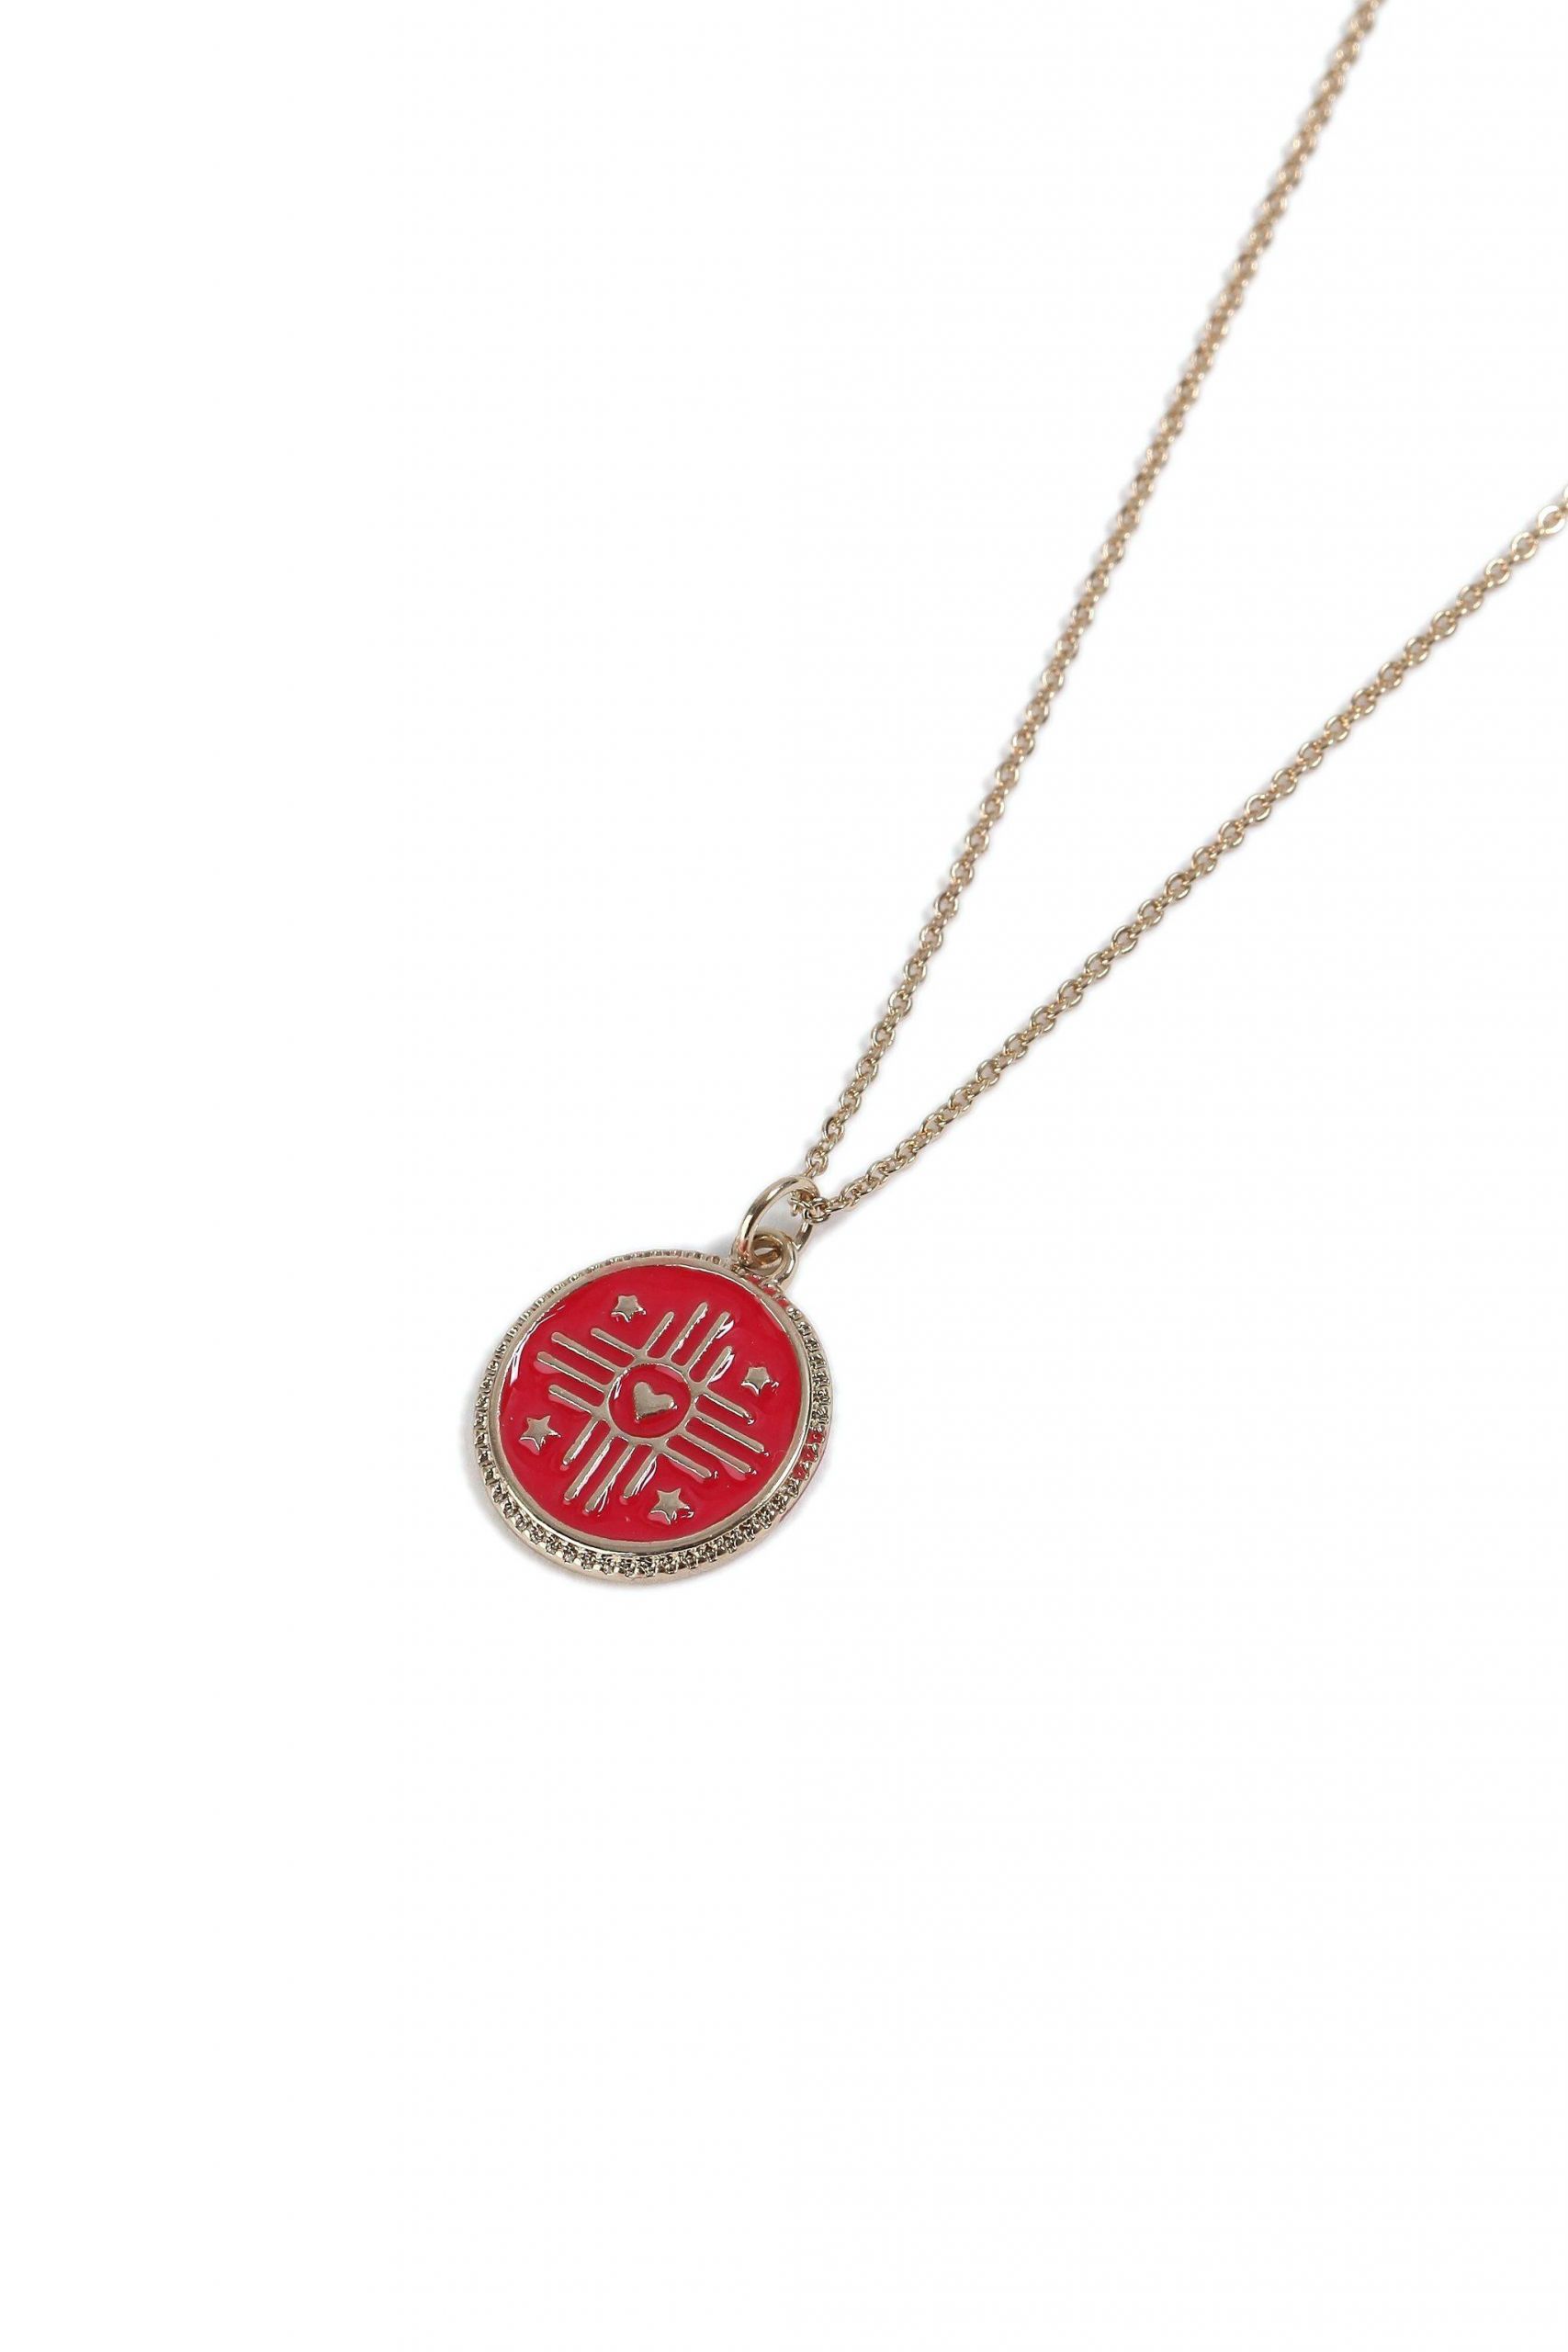 St Christopher Necklace Meaning
 St Christopher Necklace Meaning 8 Stunning Saint In